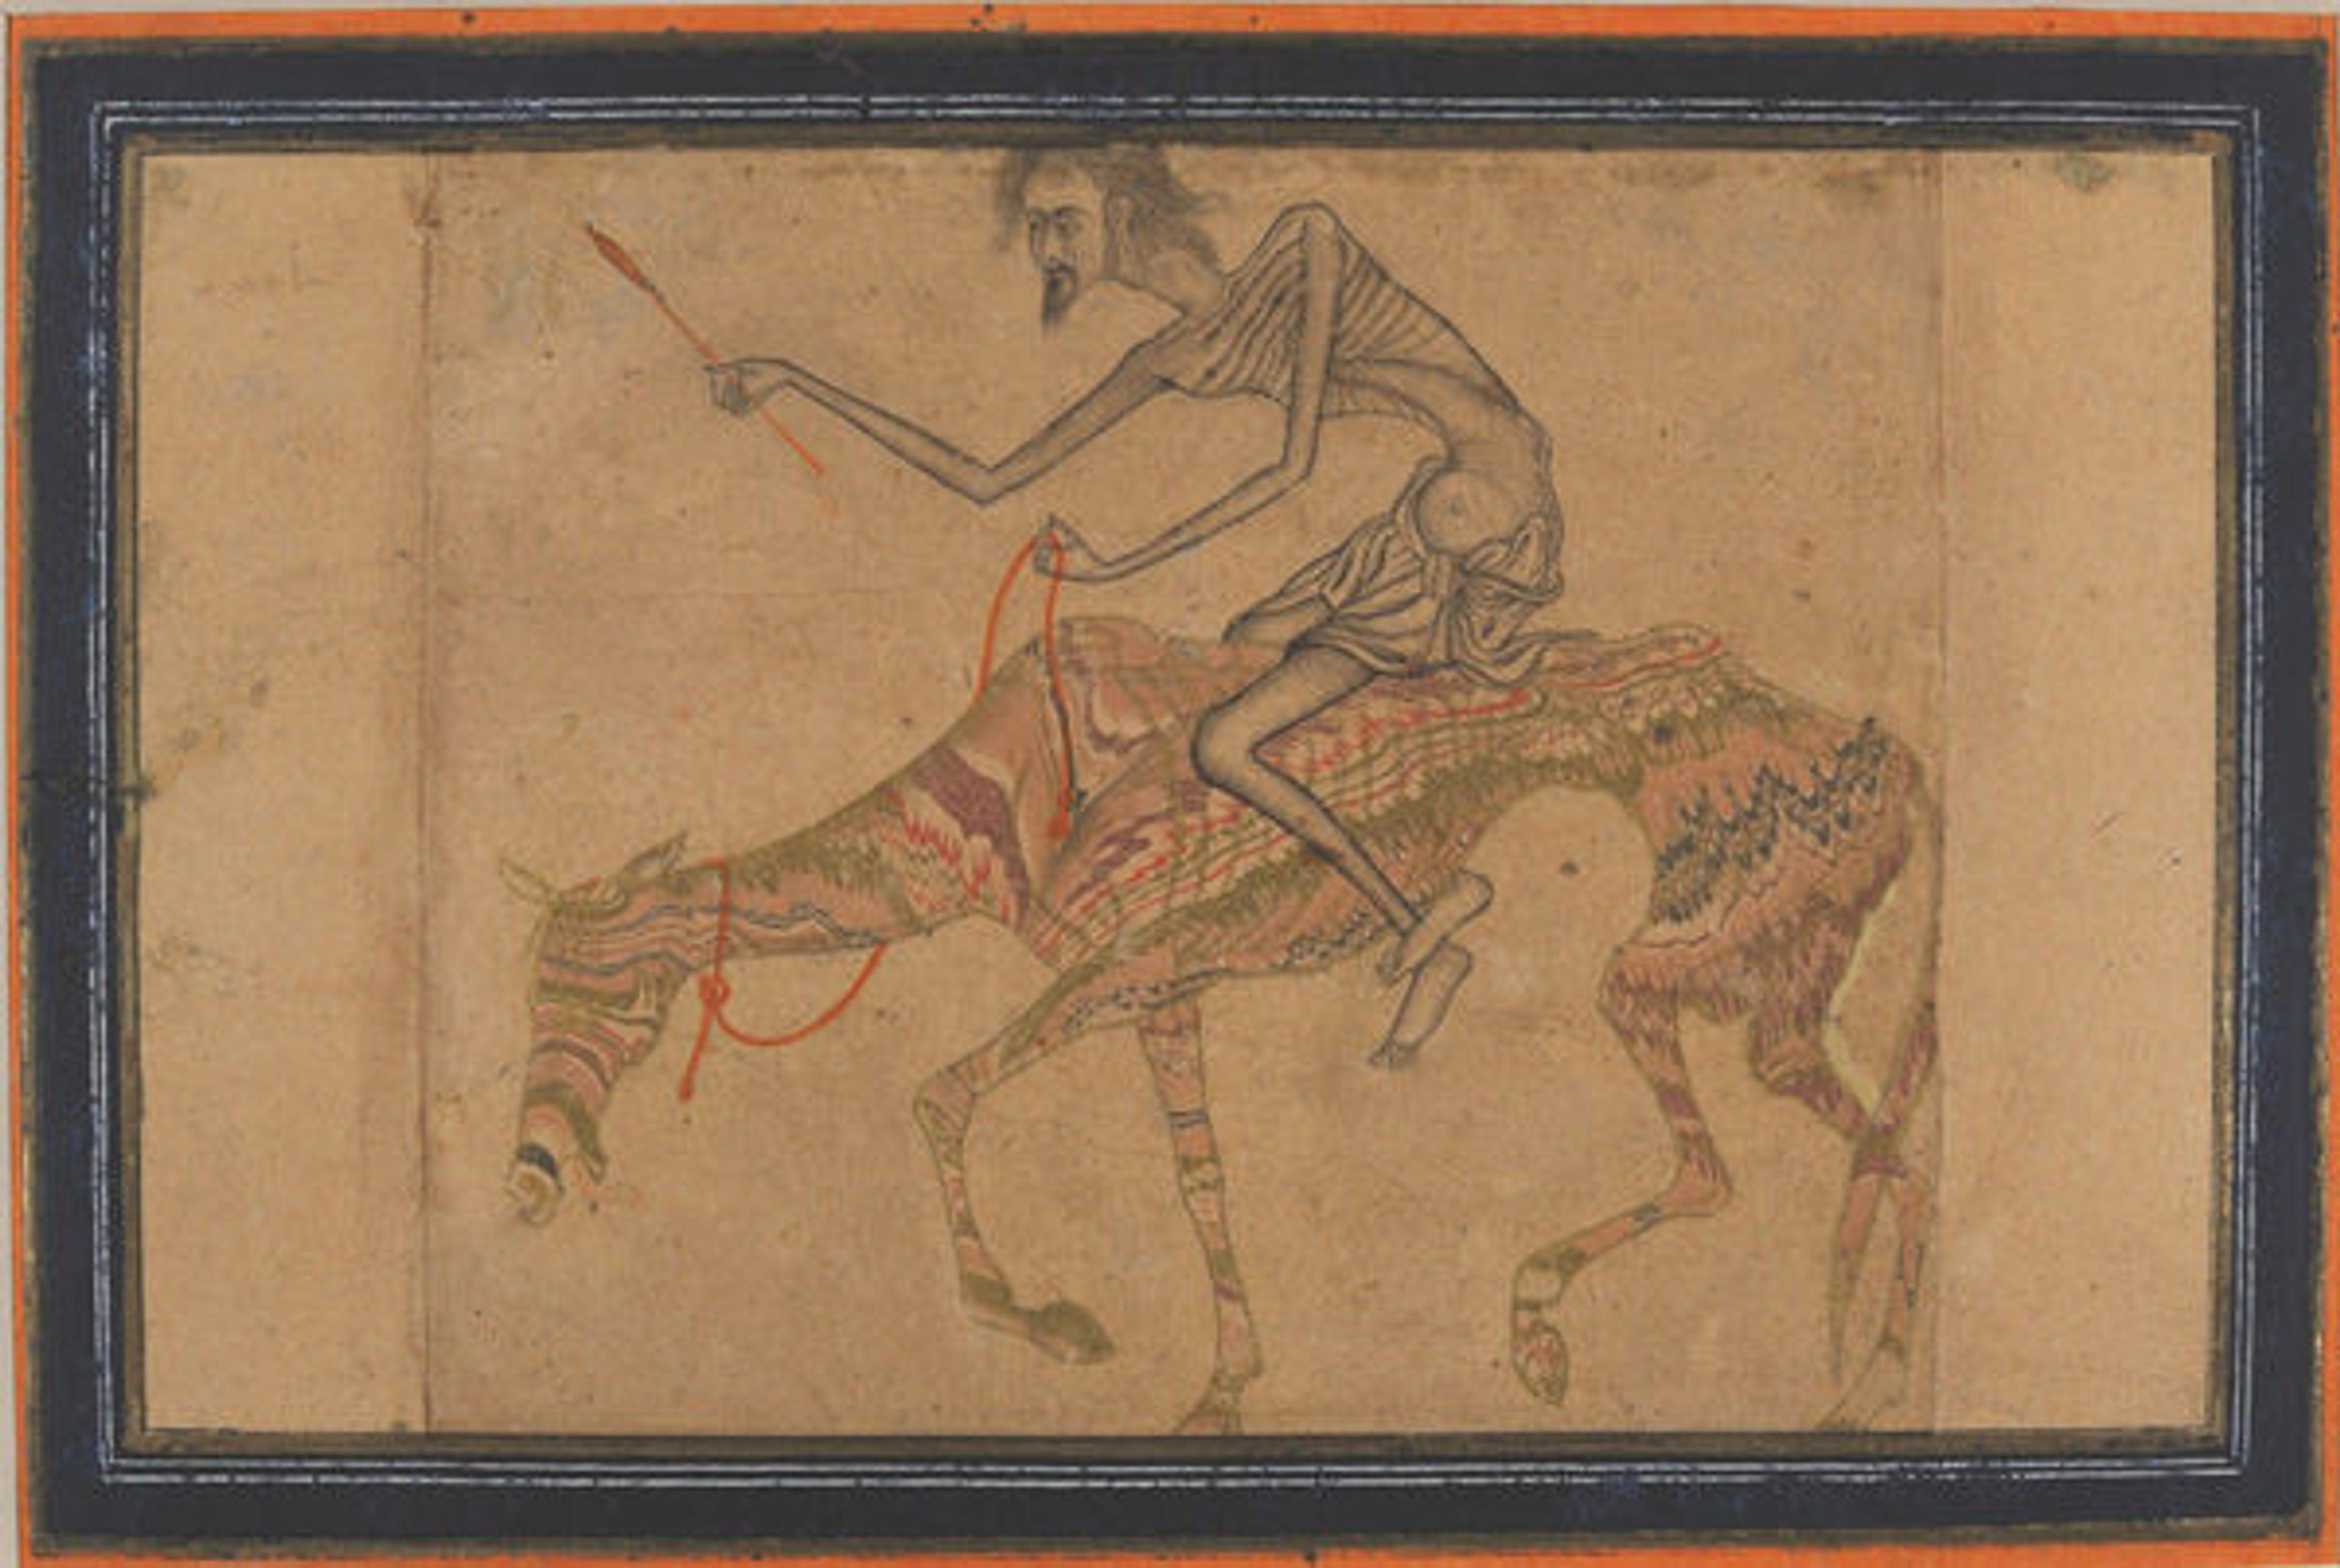 Emaciated Horse and Rider, ca. 1625. India, Deccan, Bijapur. Islamic. Ink, opaque watercolor, and gold on paper; marbelized paper. The Metropolitan Museum of Art, New York, Rogers Fund, 1944 (44.154)